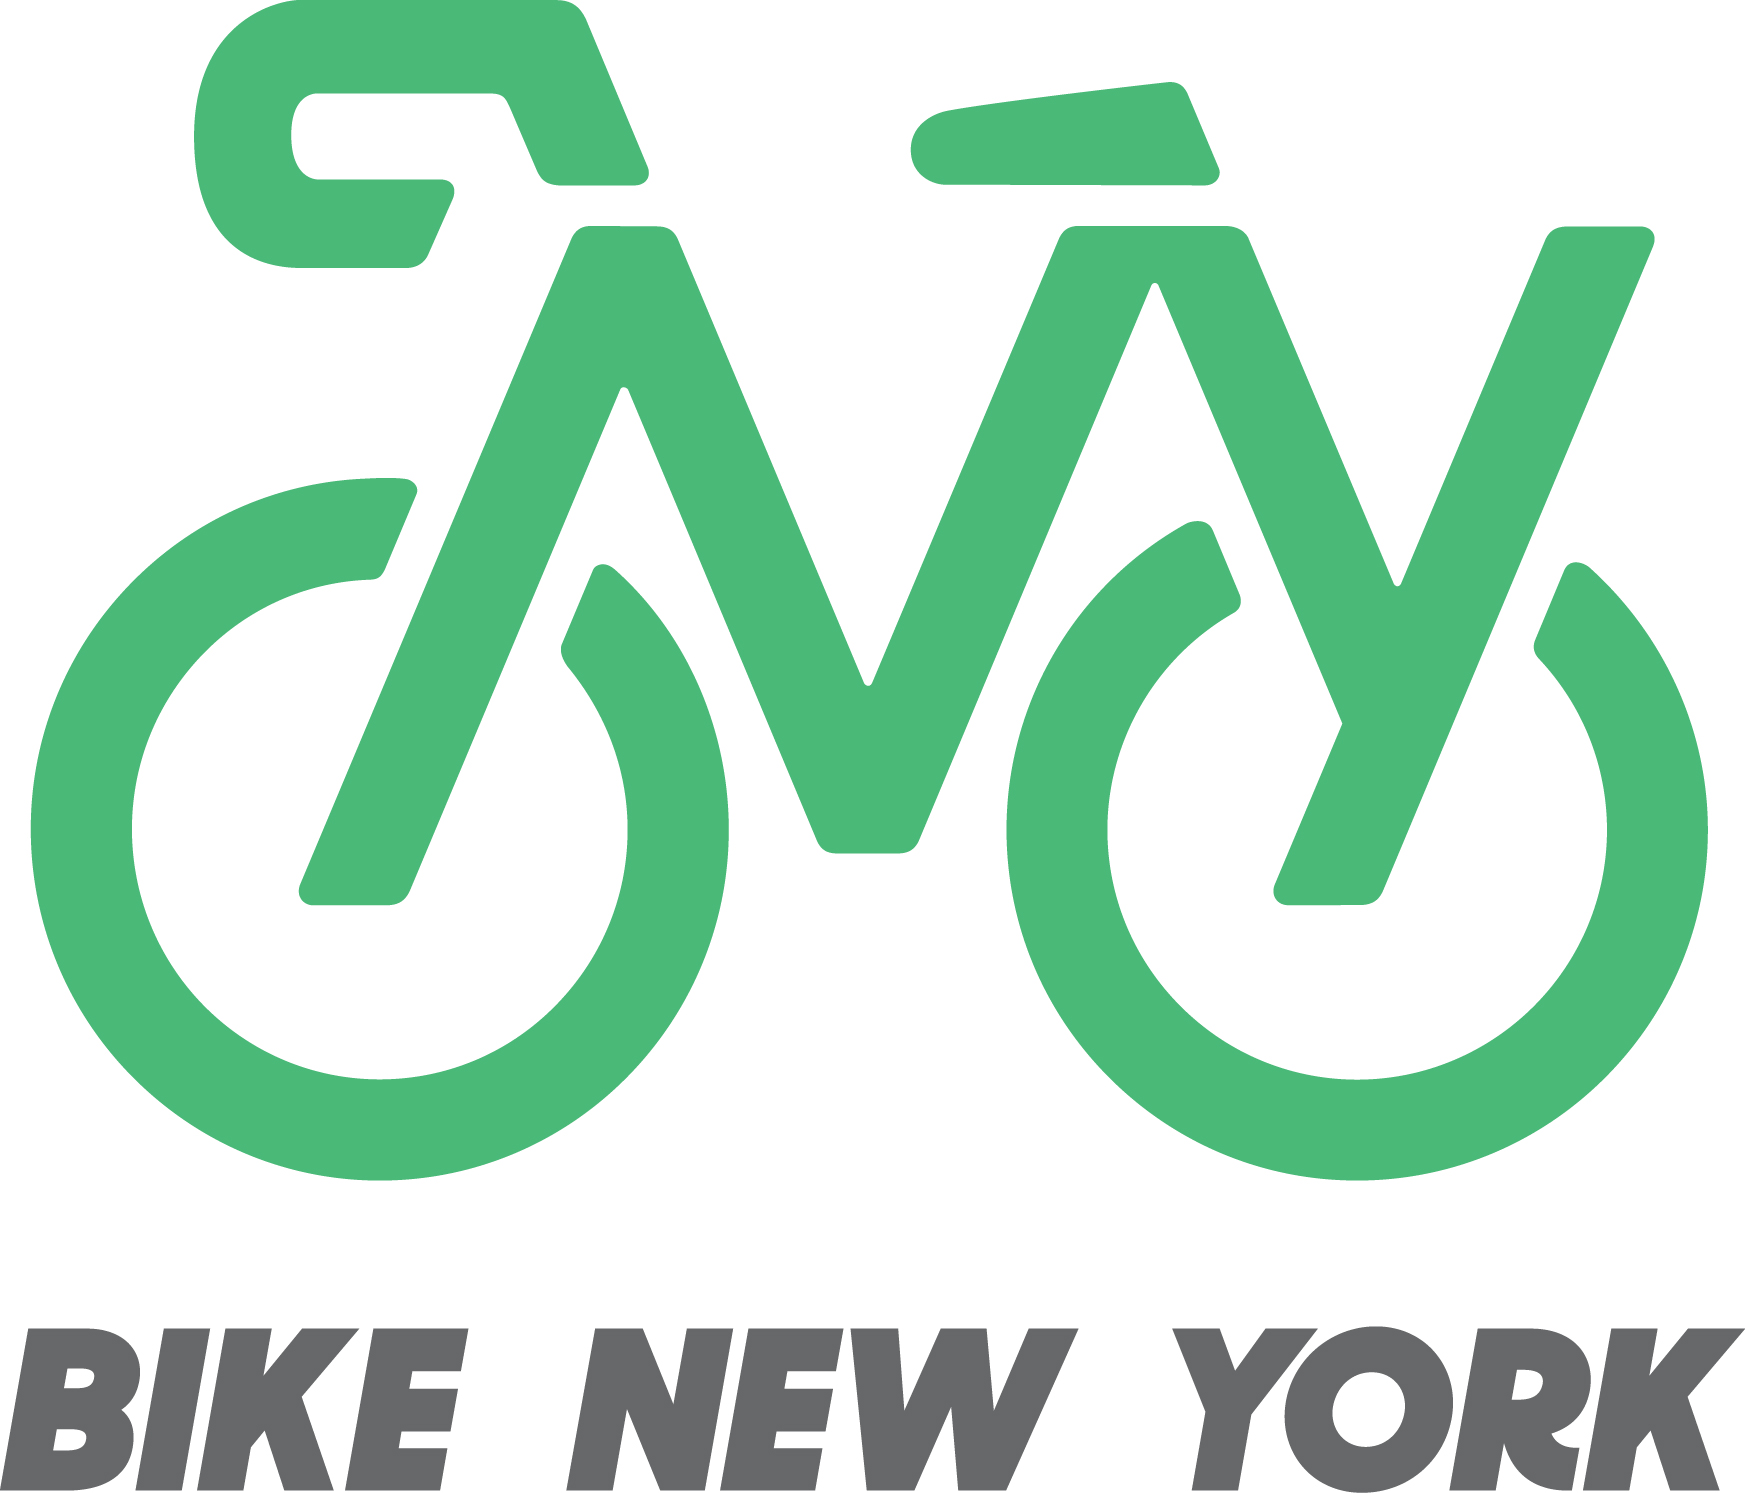 Bike New York is New York City's leading proponent of cycling.